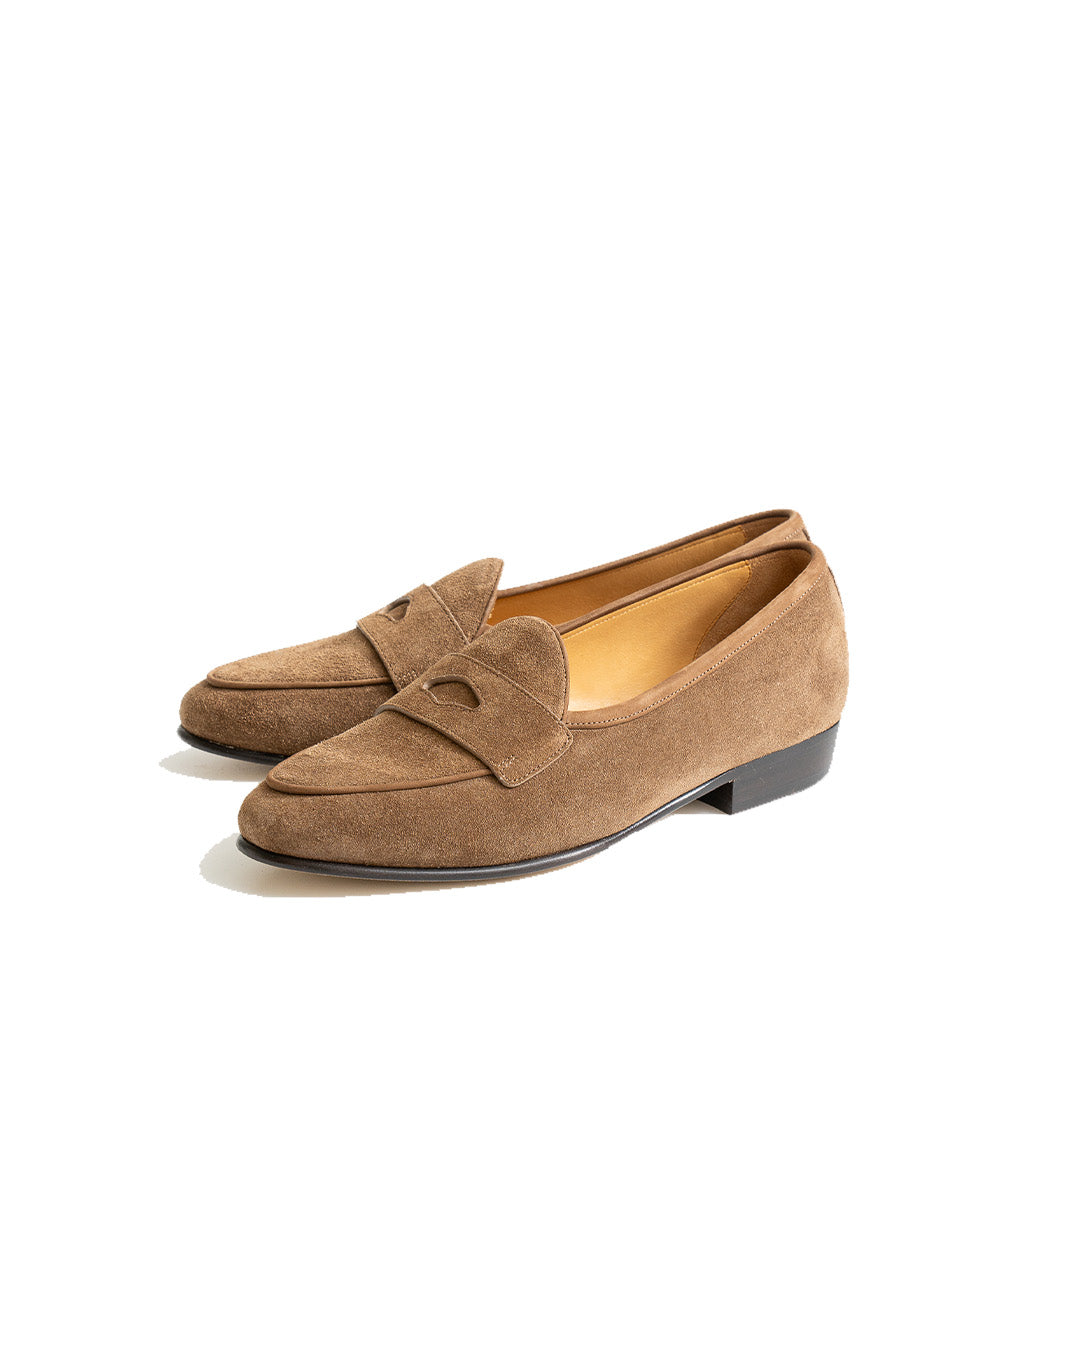 Baudoin & Lange Sagan Classic Ginkgo Loafers in Pecan Glove Suede – The ...